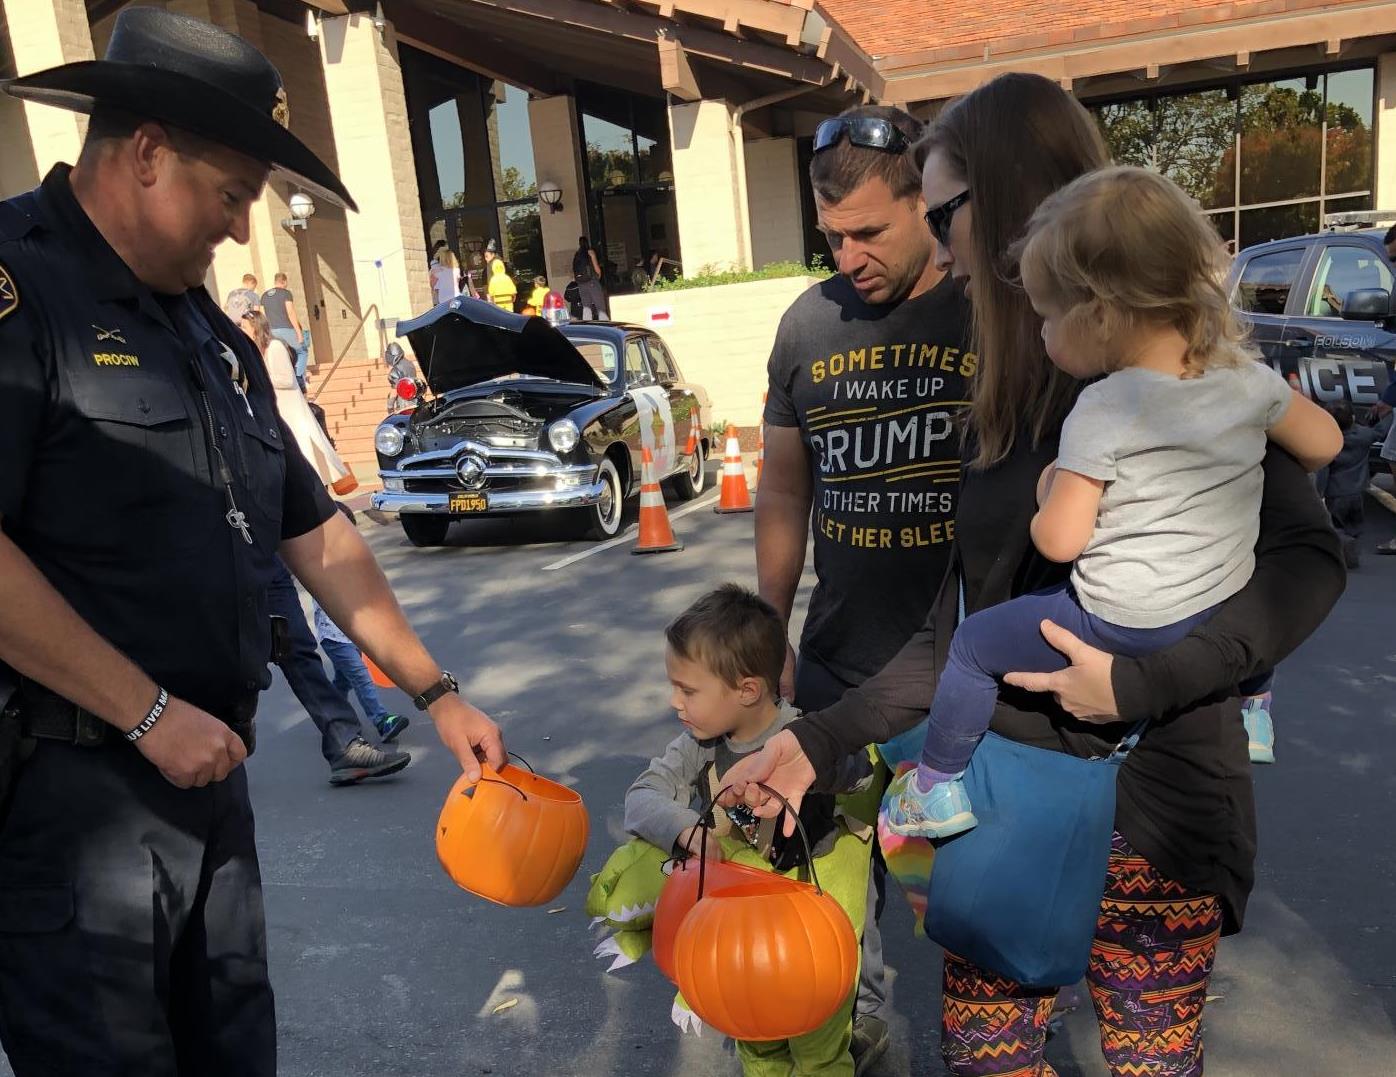 Police officer gives candy to family of trick or treaters